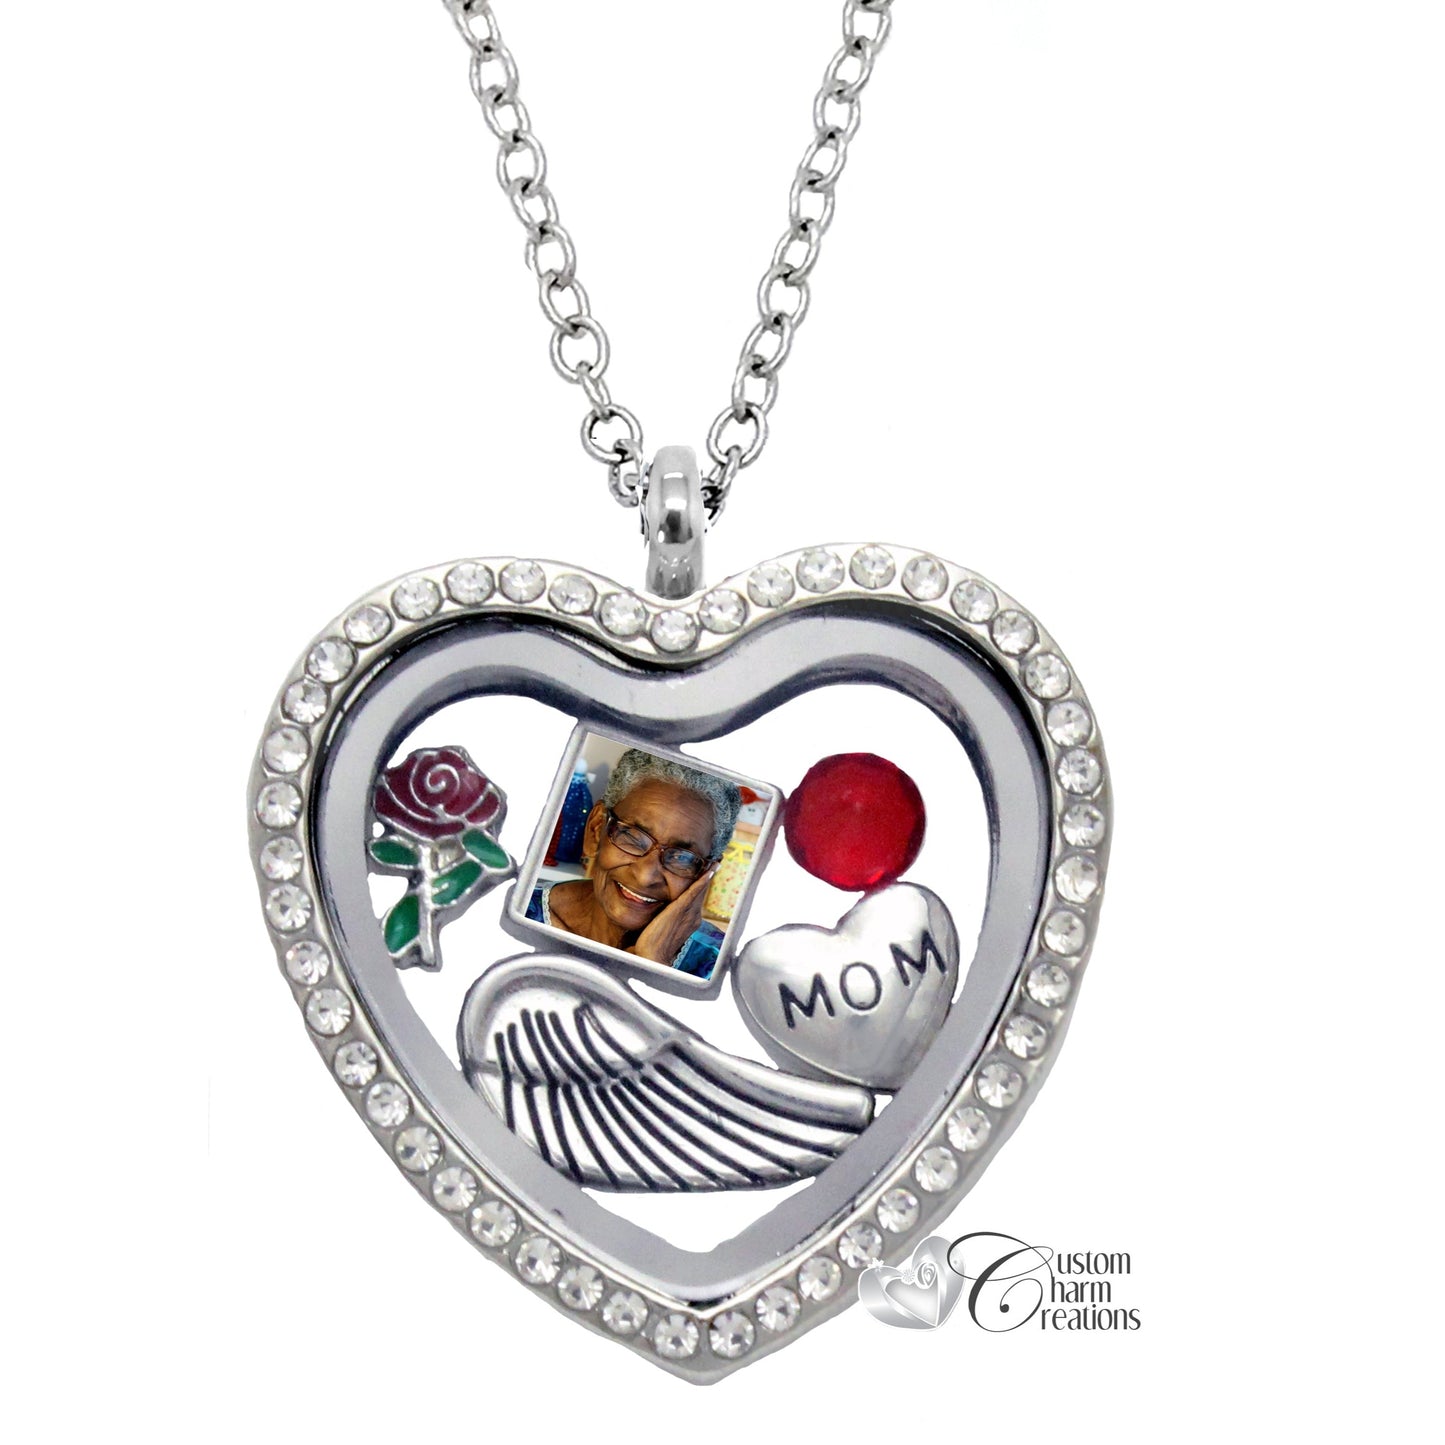 Dream Heart Floating Charms, Memory Lockets